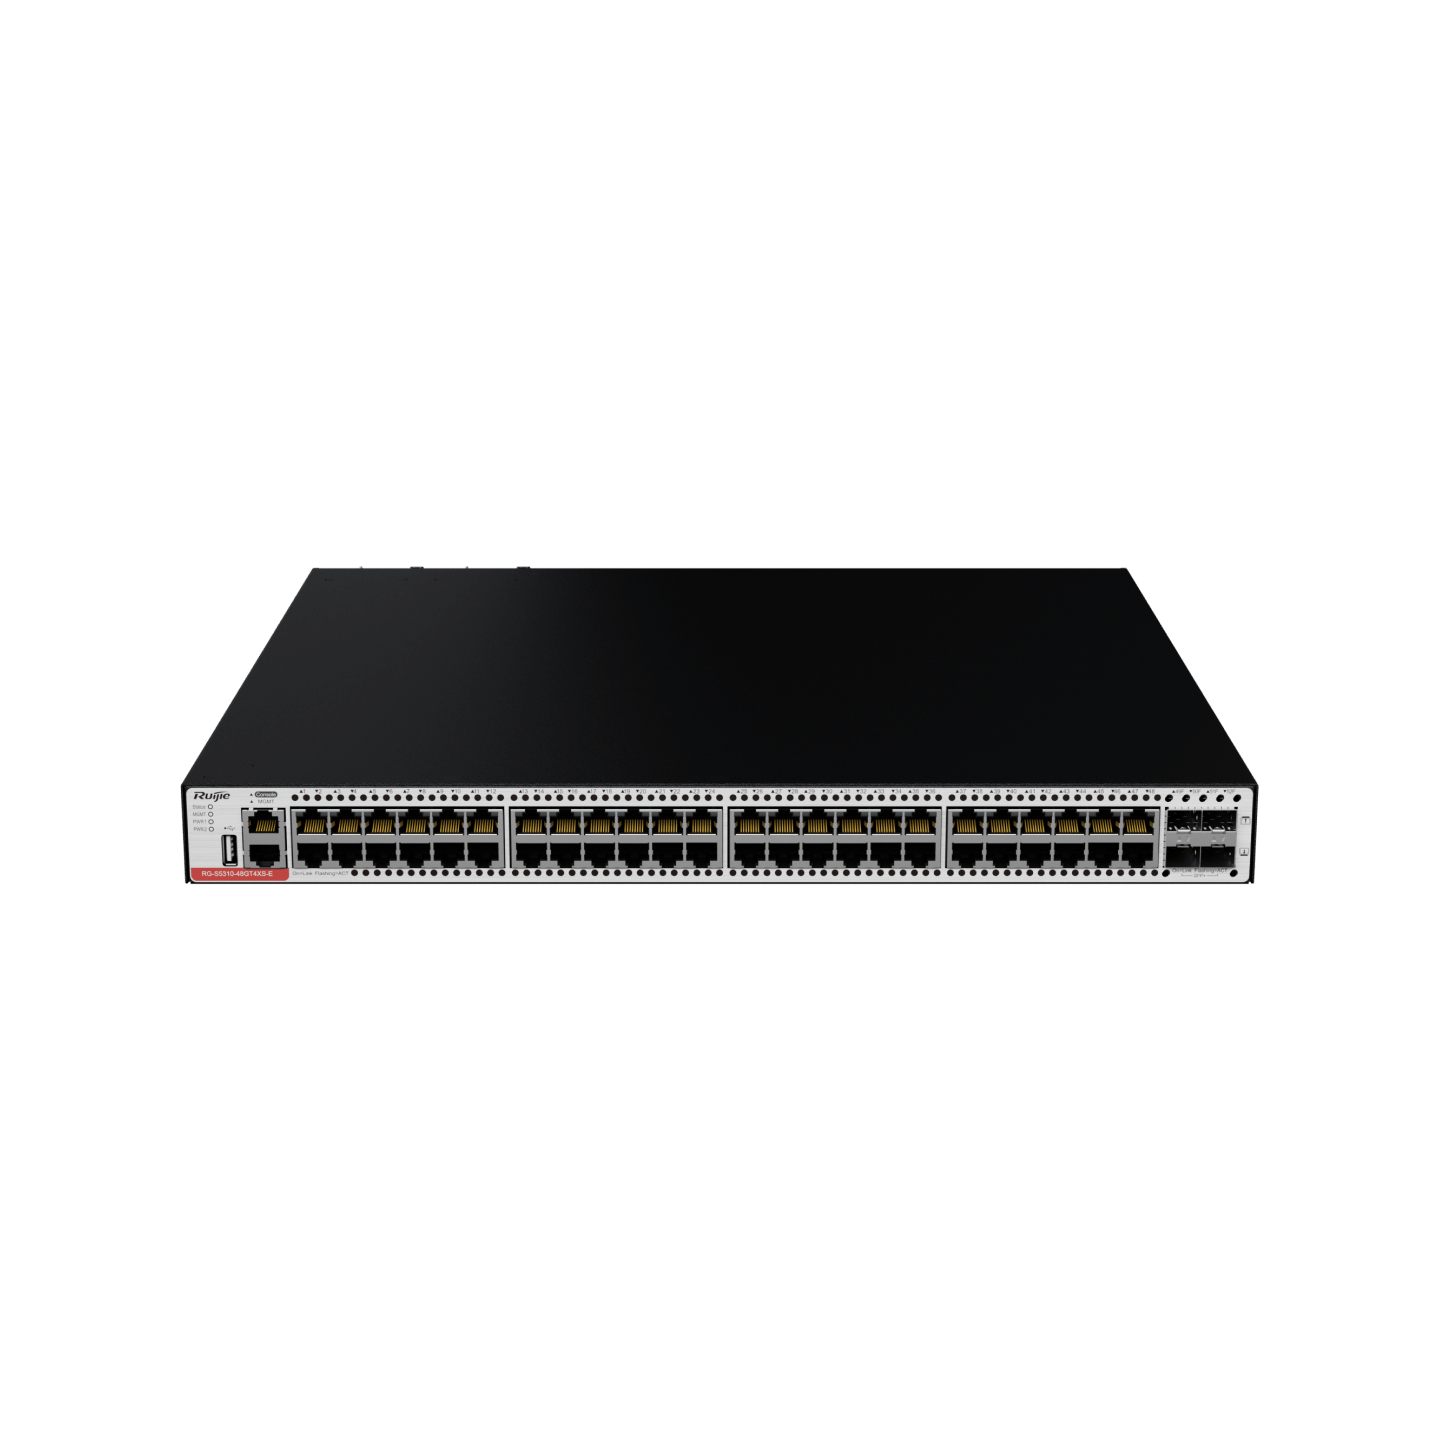 RG-S5310-48GT4XS-E 48-Port GE Electrical Layer 3 Managed Access Switch, Four 10G Uplink Ports